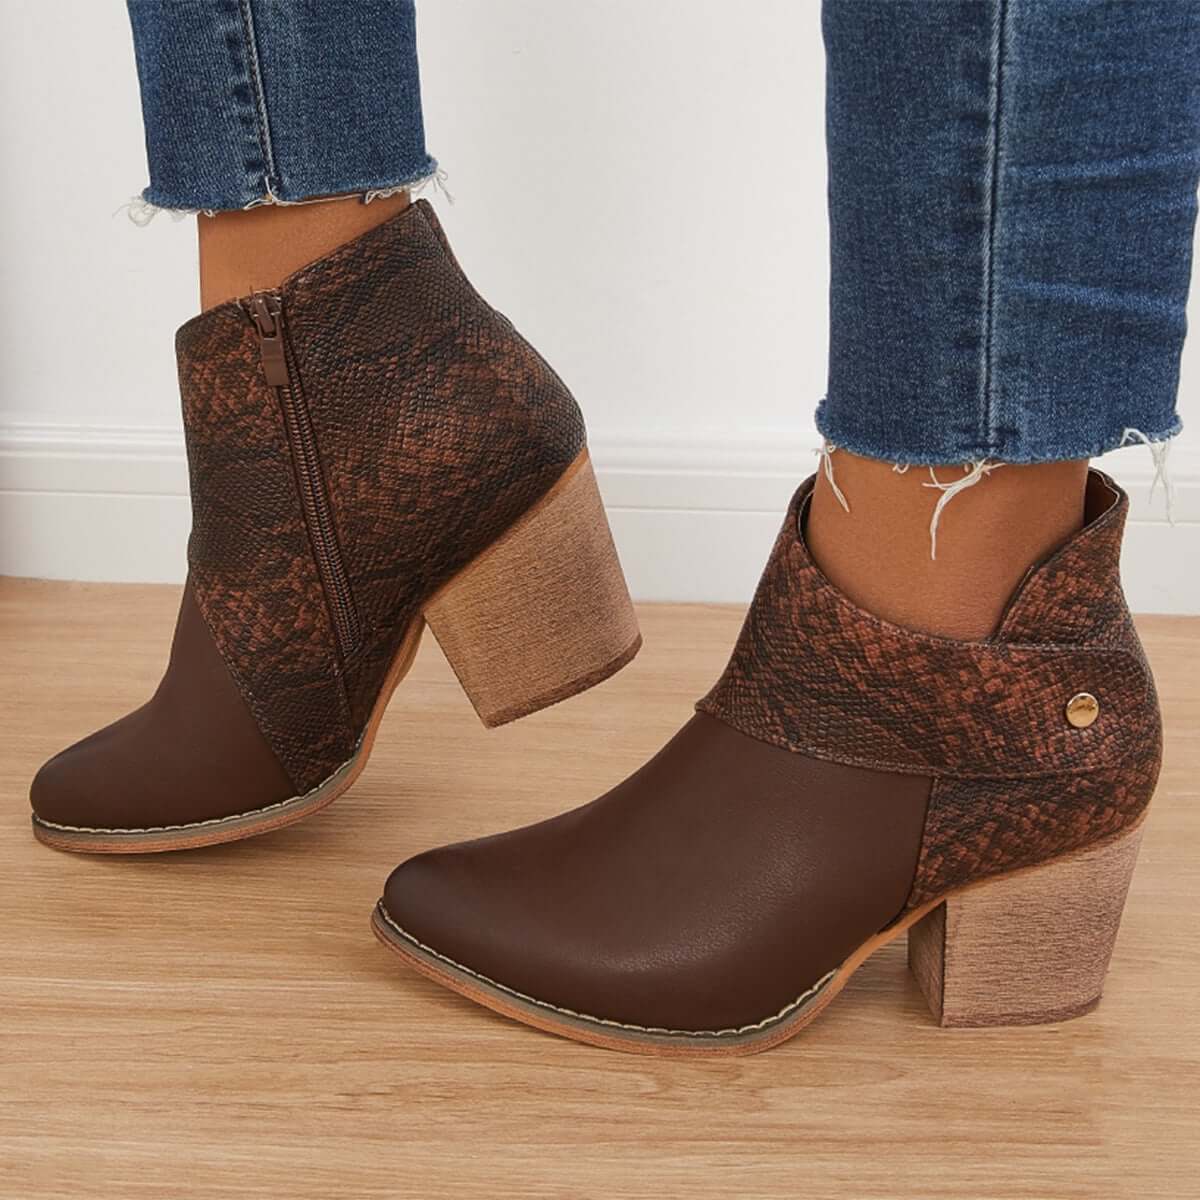 Western Cowgirl Ankle Boots Chunky Heel Buckle Short Booties